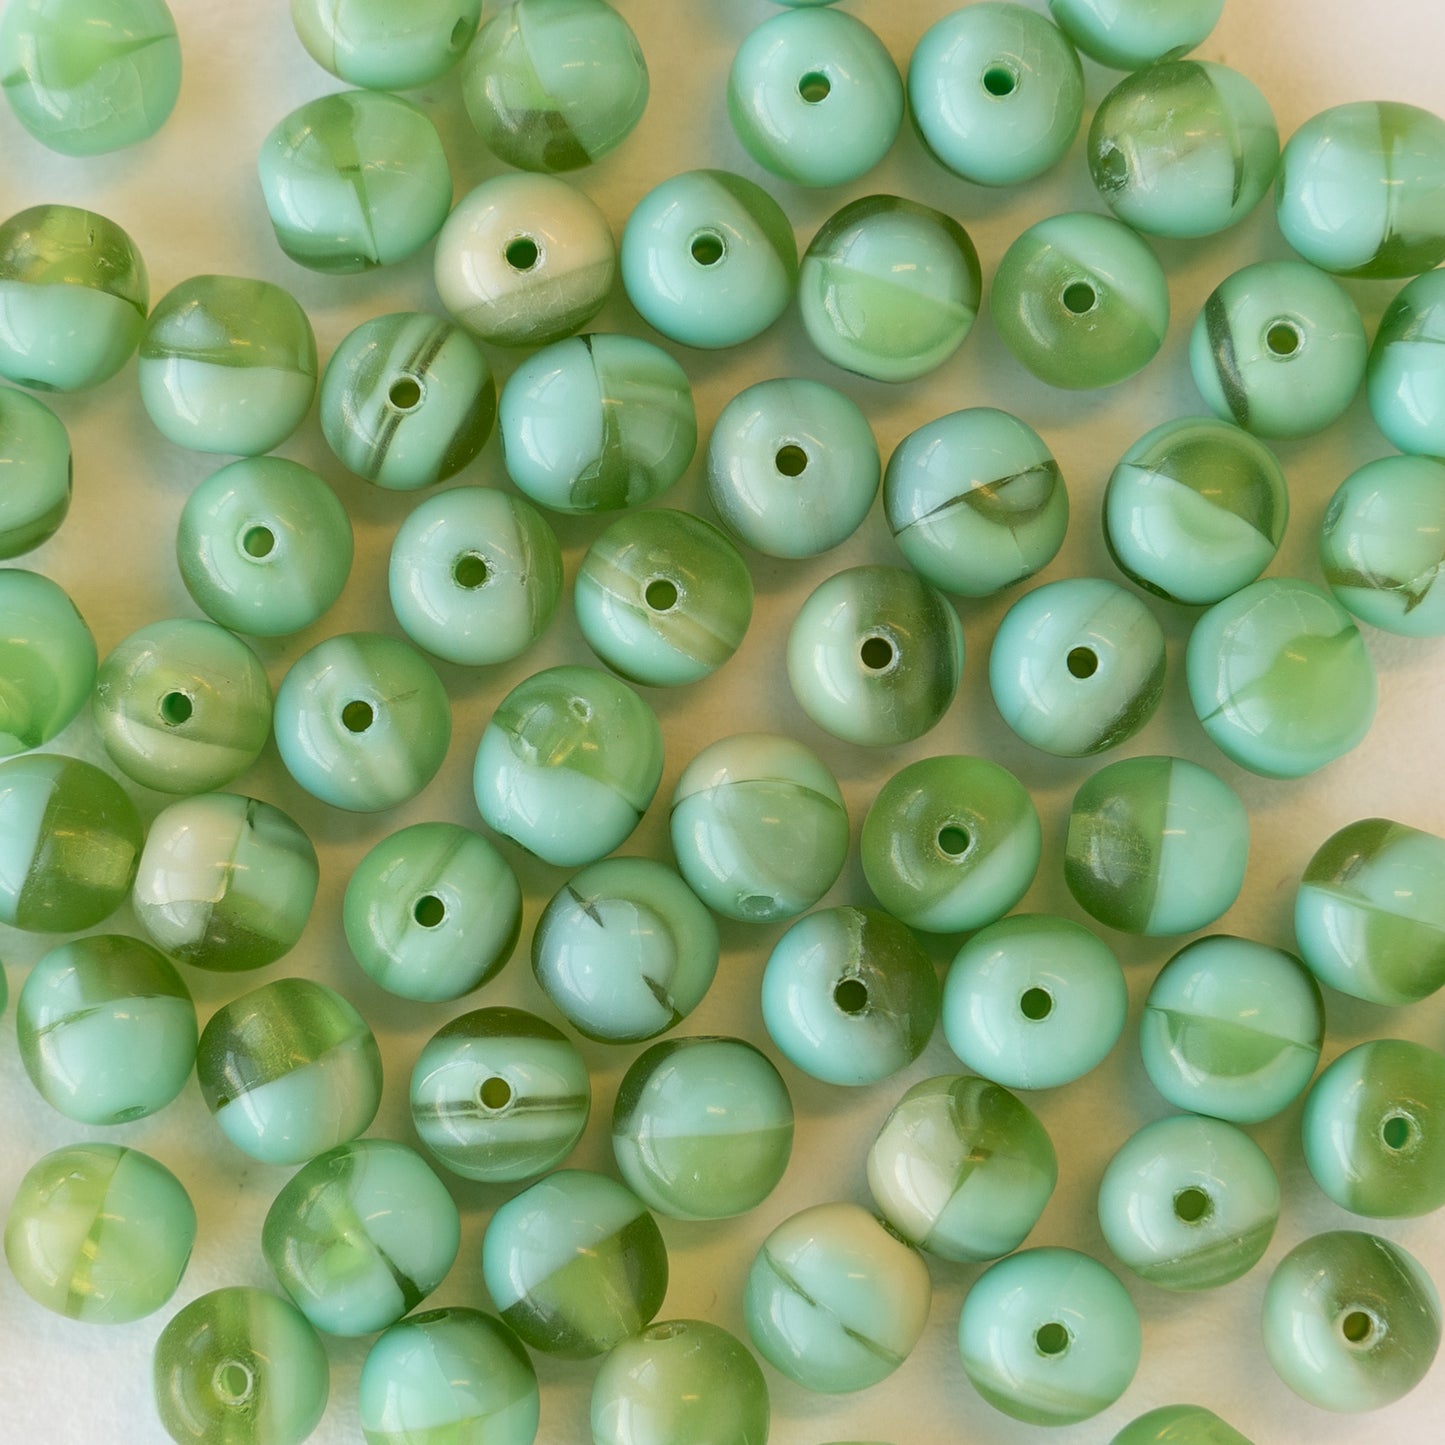 6mm Round Glass Beads - Seafoam Lime and Ivory Mix - 120 Beads